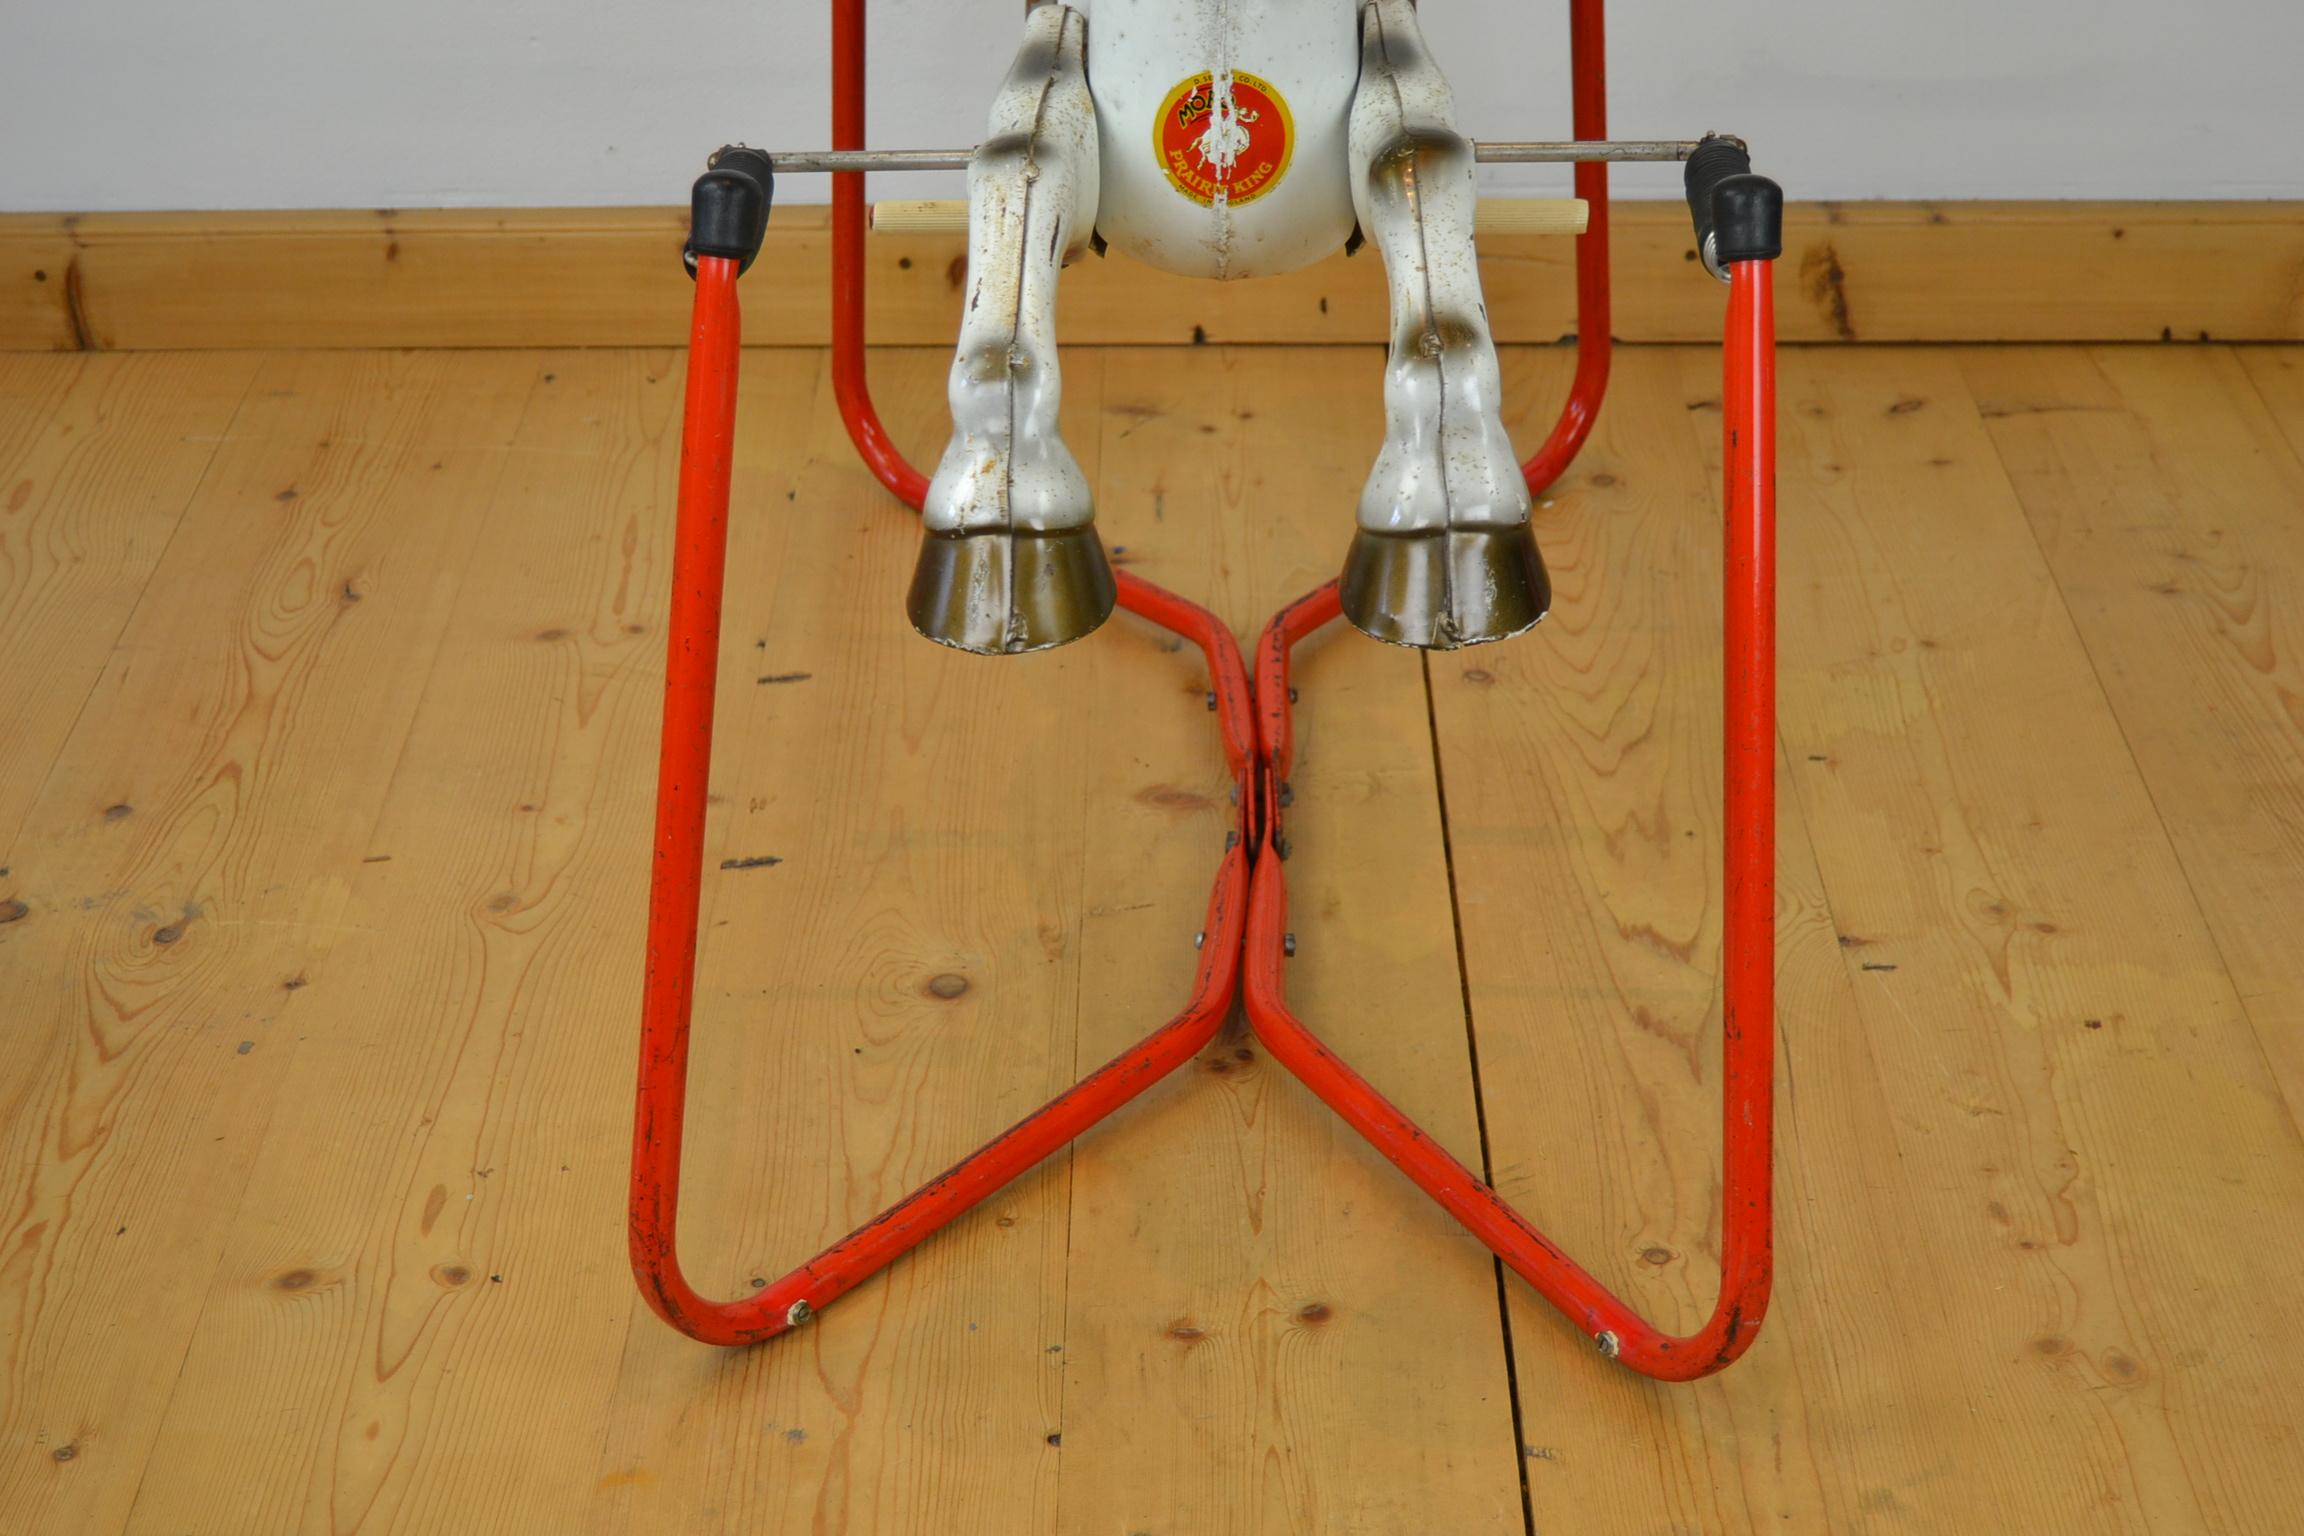 Metal Mobo Prairie King Rocking Horse Toy, England, 1960s For Sale